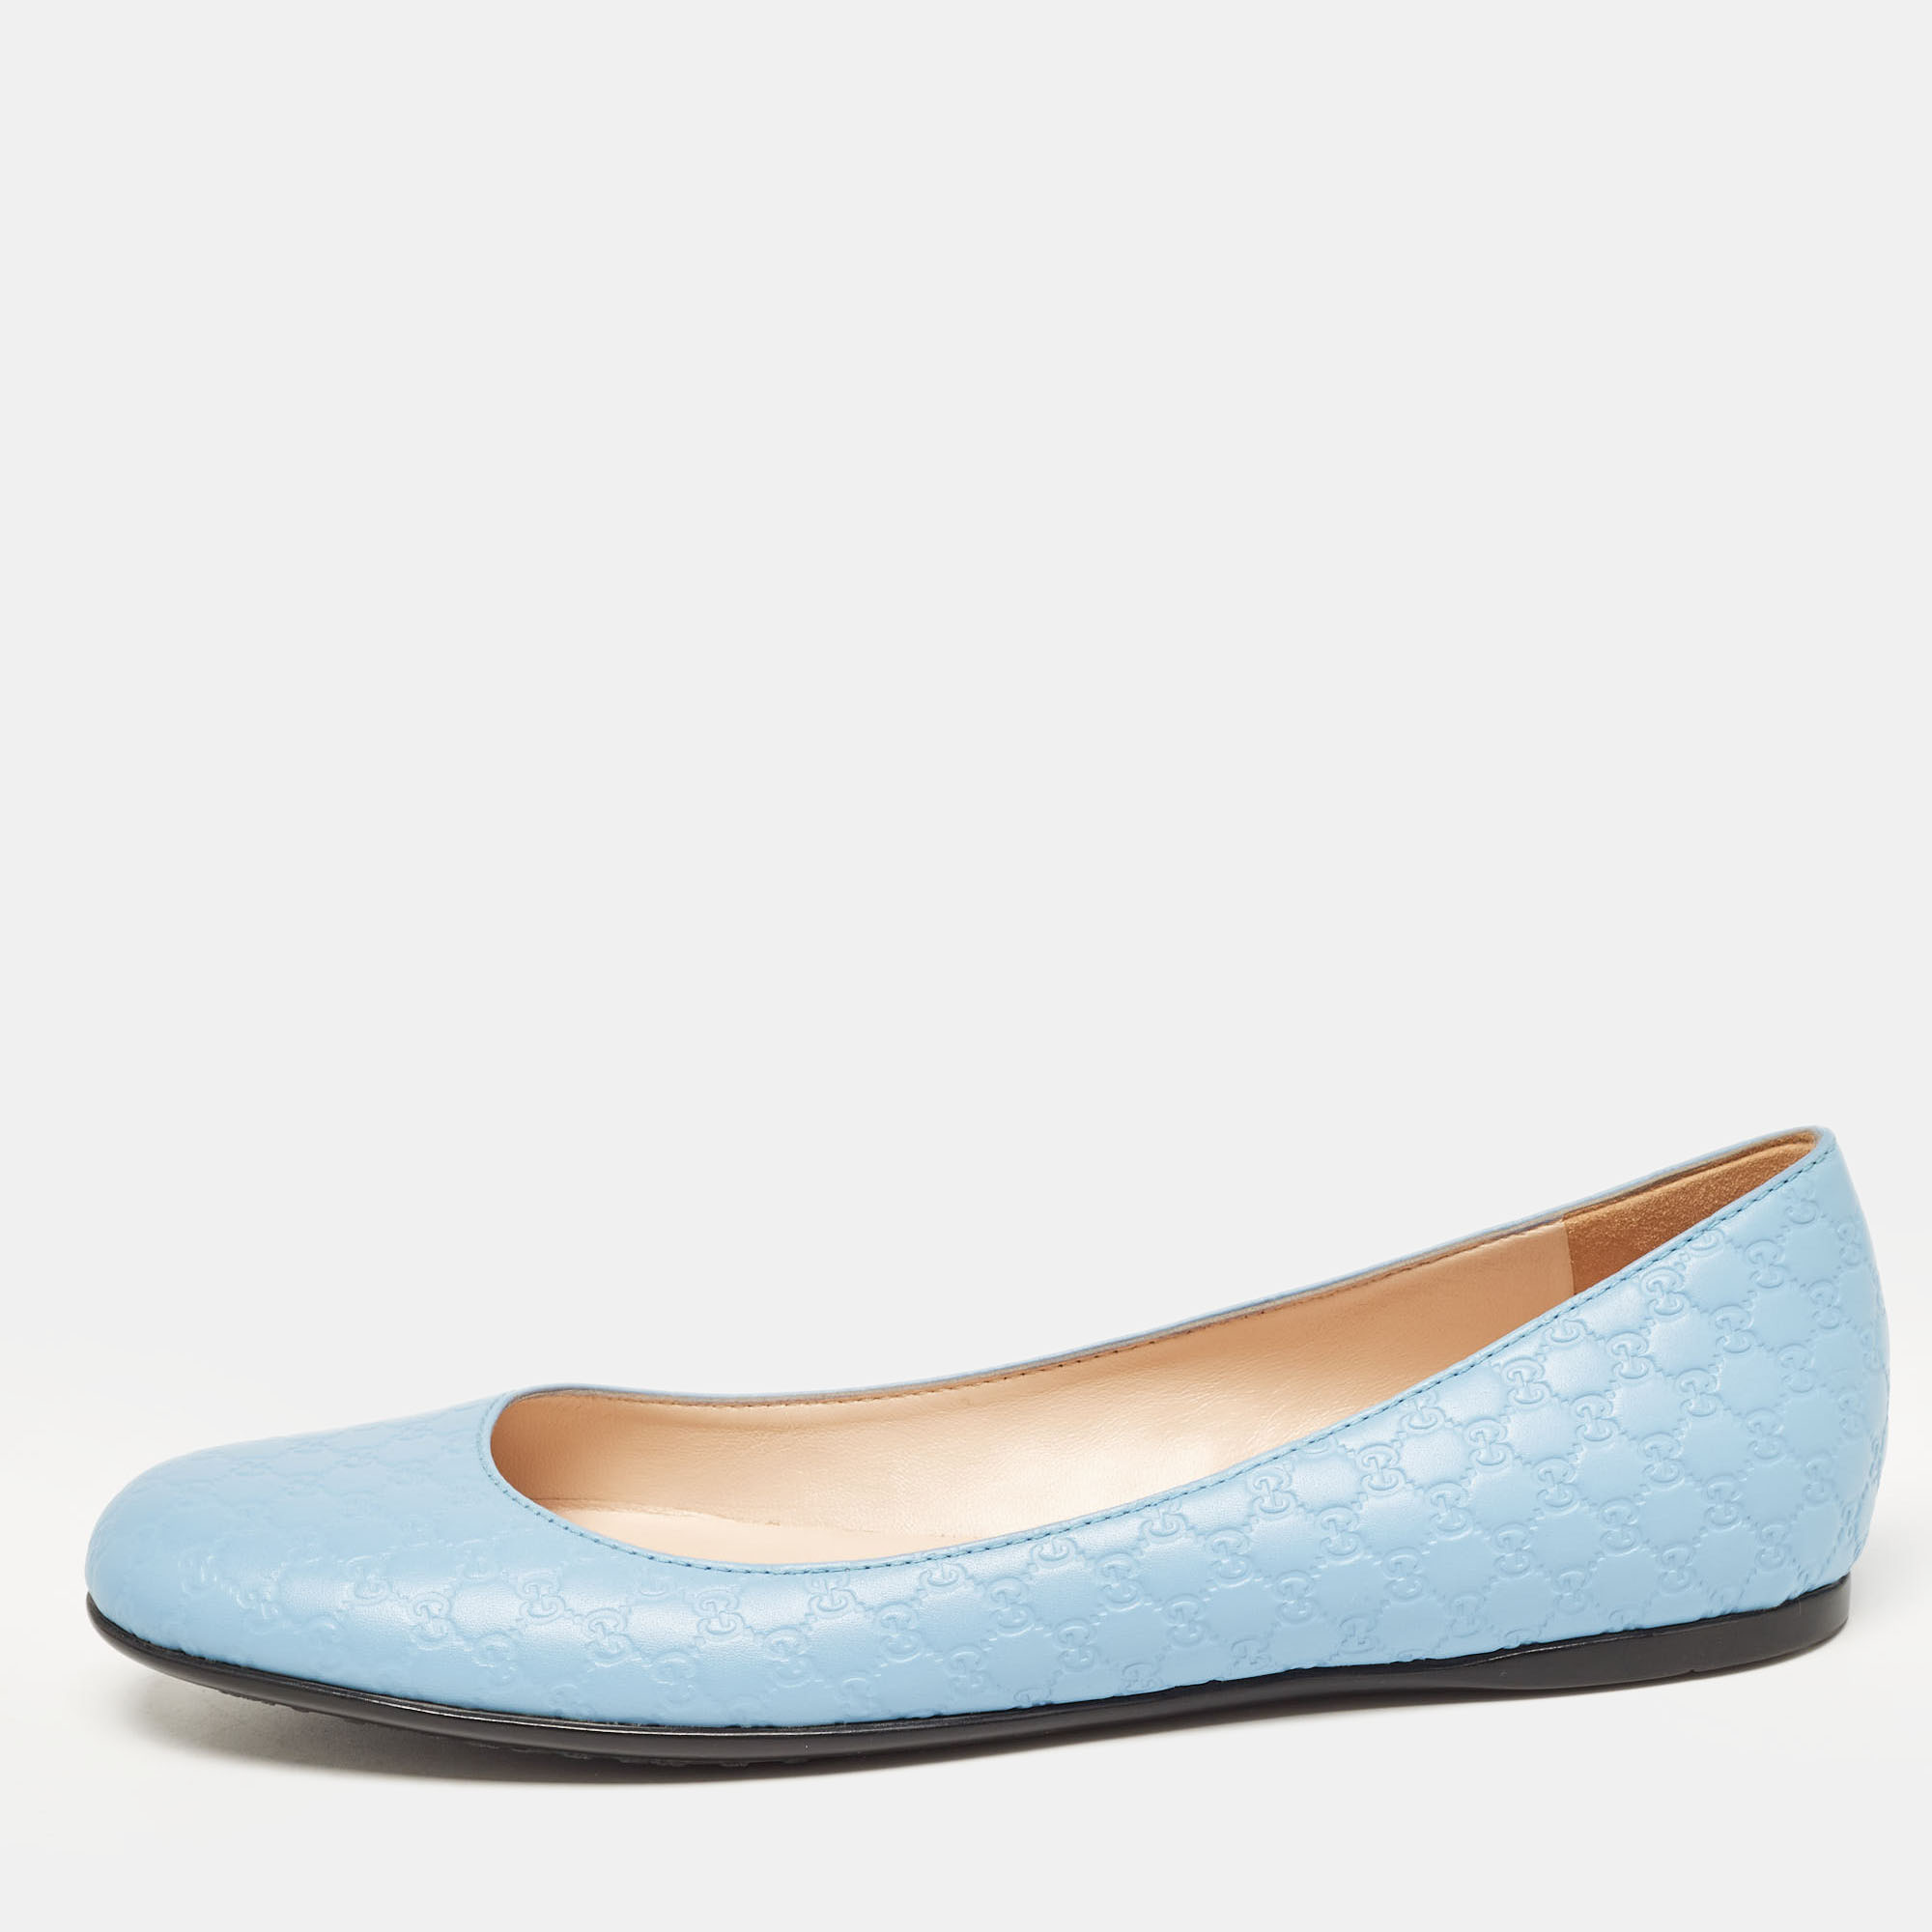 Pre-owned Gucci Blue Leather Microssima Ballet Flats Size 39.5